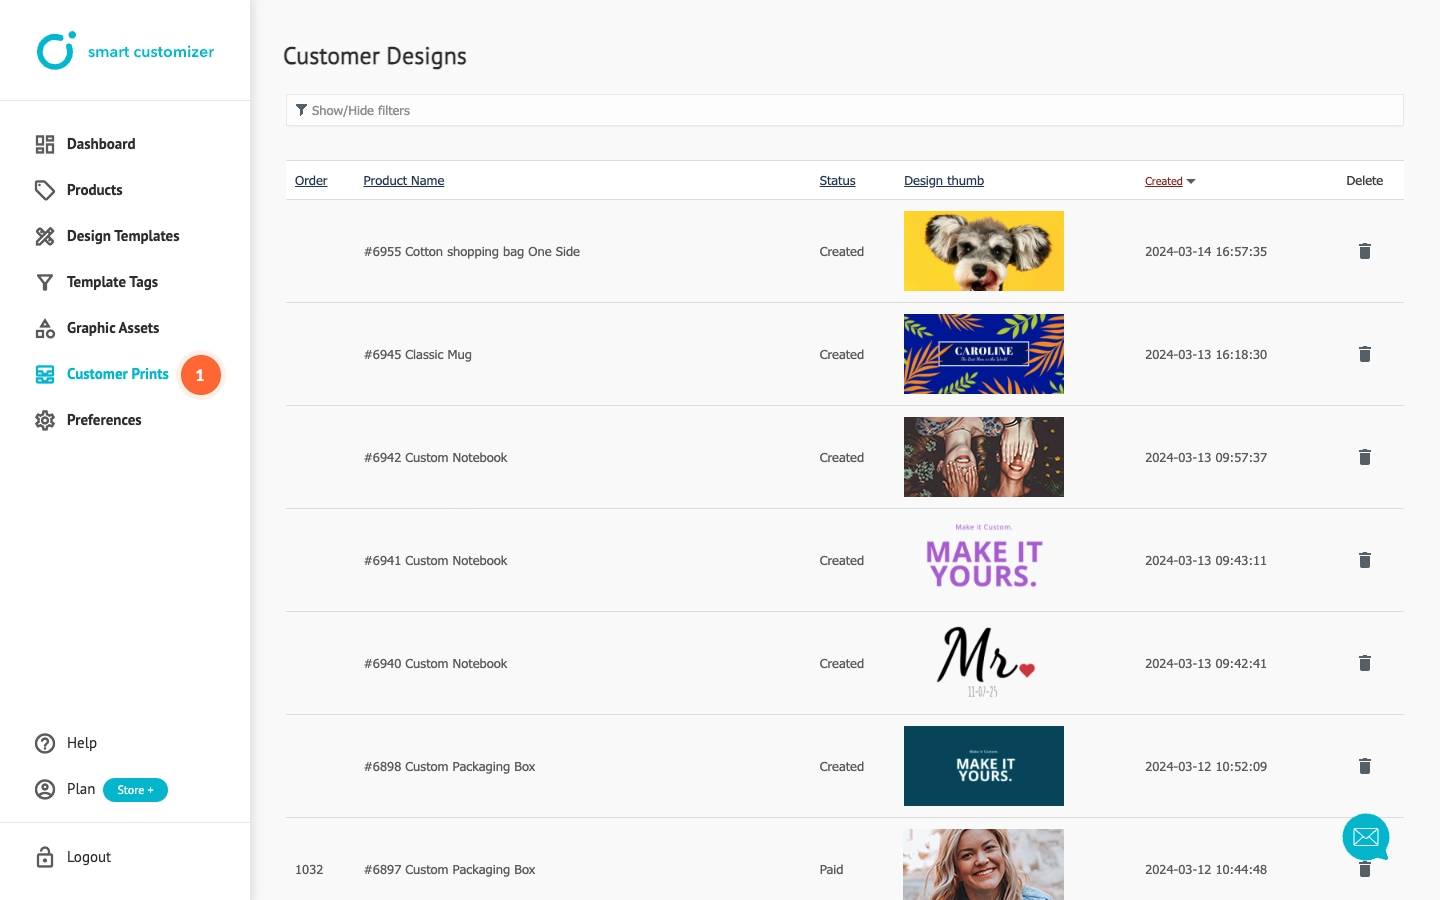 The list of printes generated by customer in customizer app